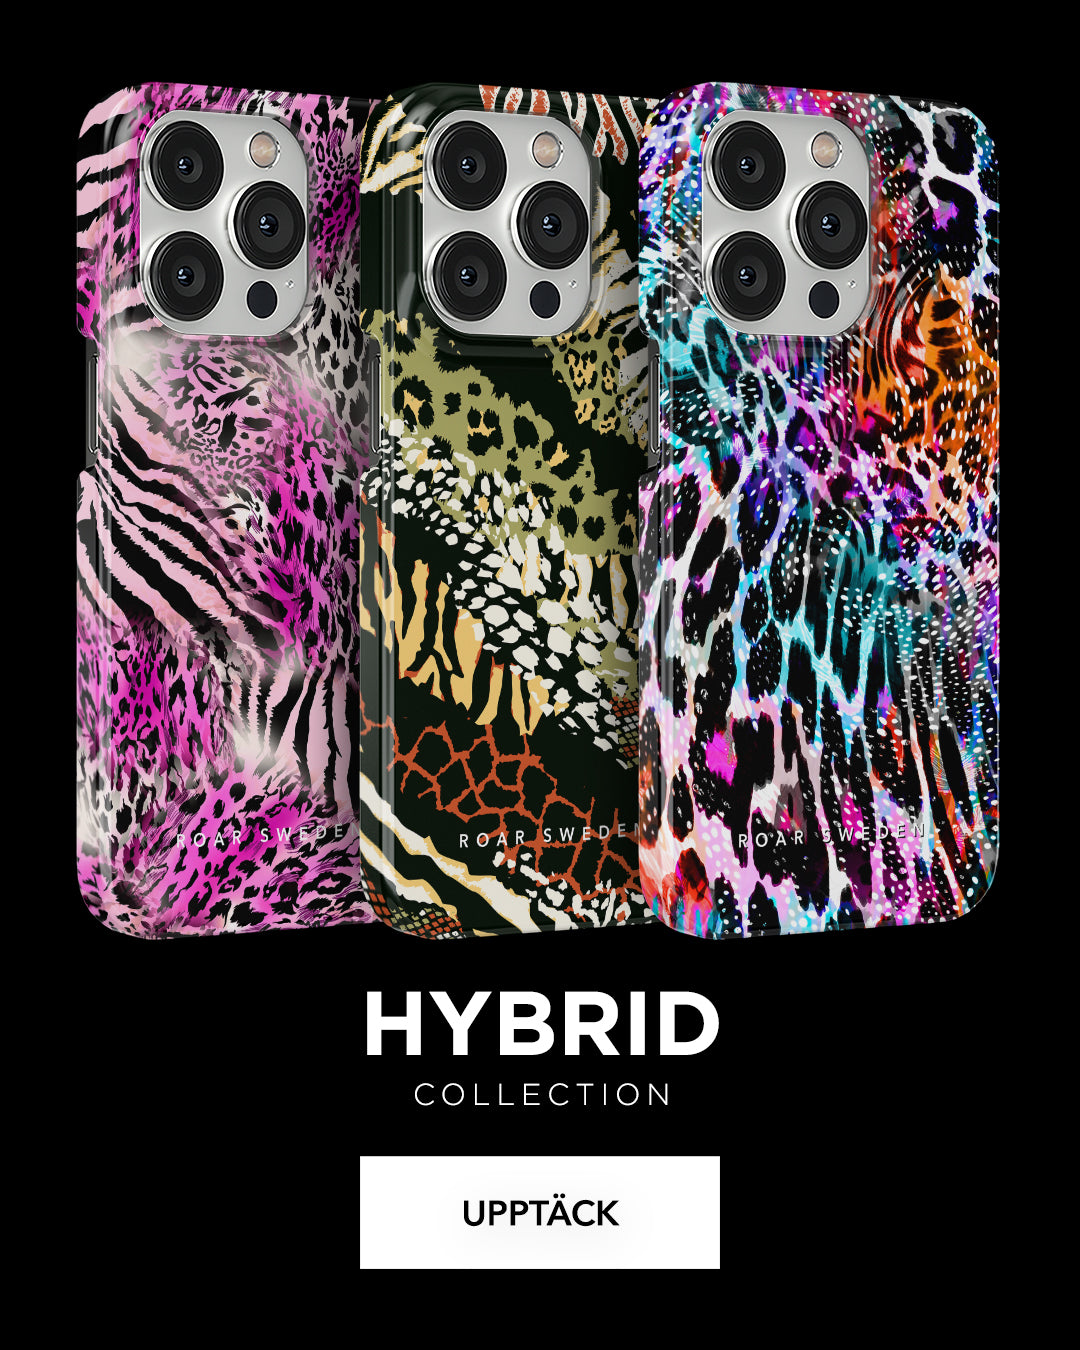 Three phone cases from the hybrid collection with vibrant animal print designs, labeled by the brand upptäck.